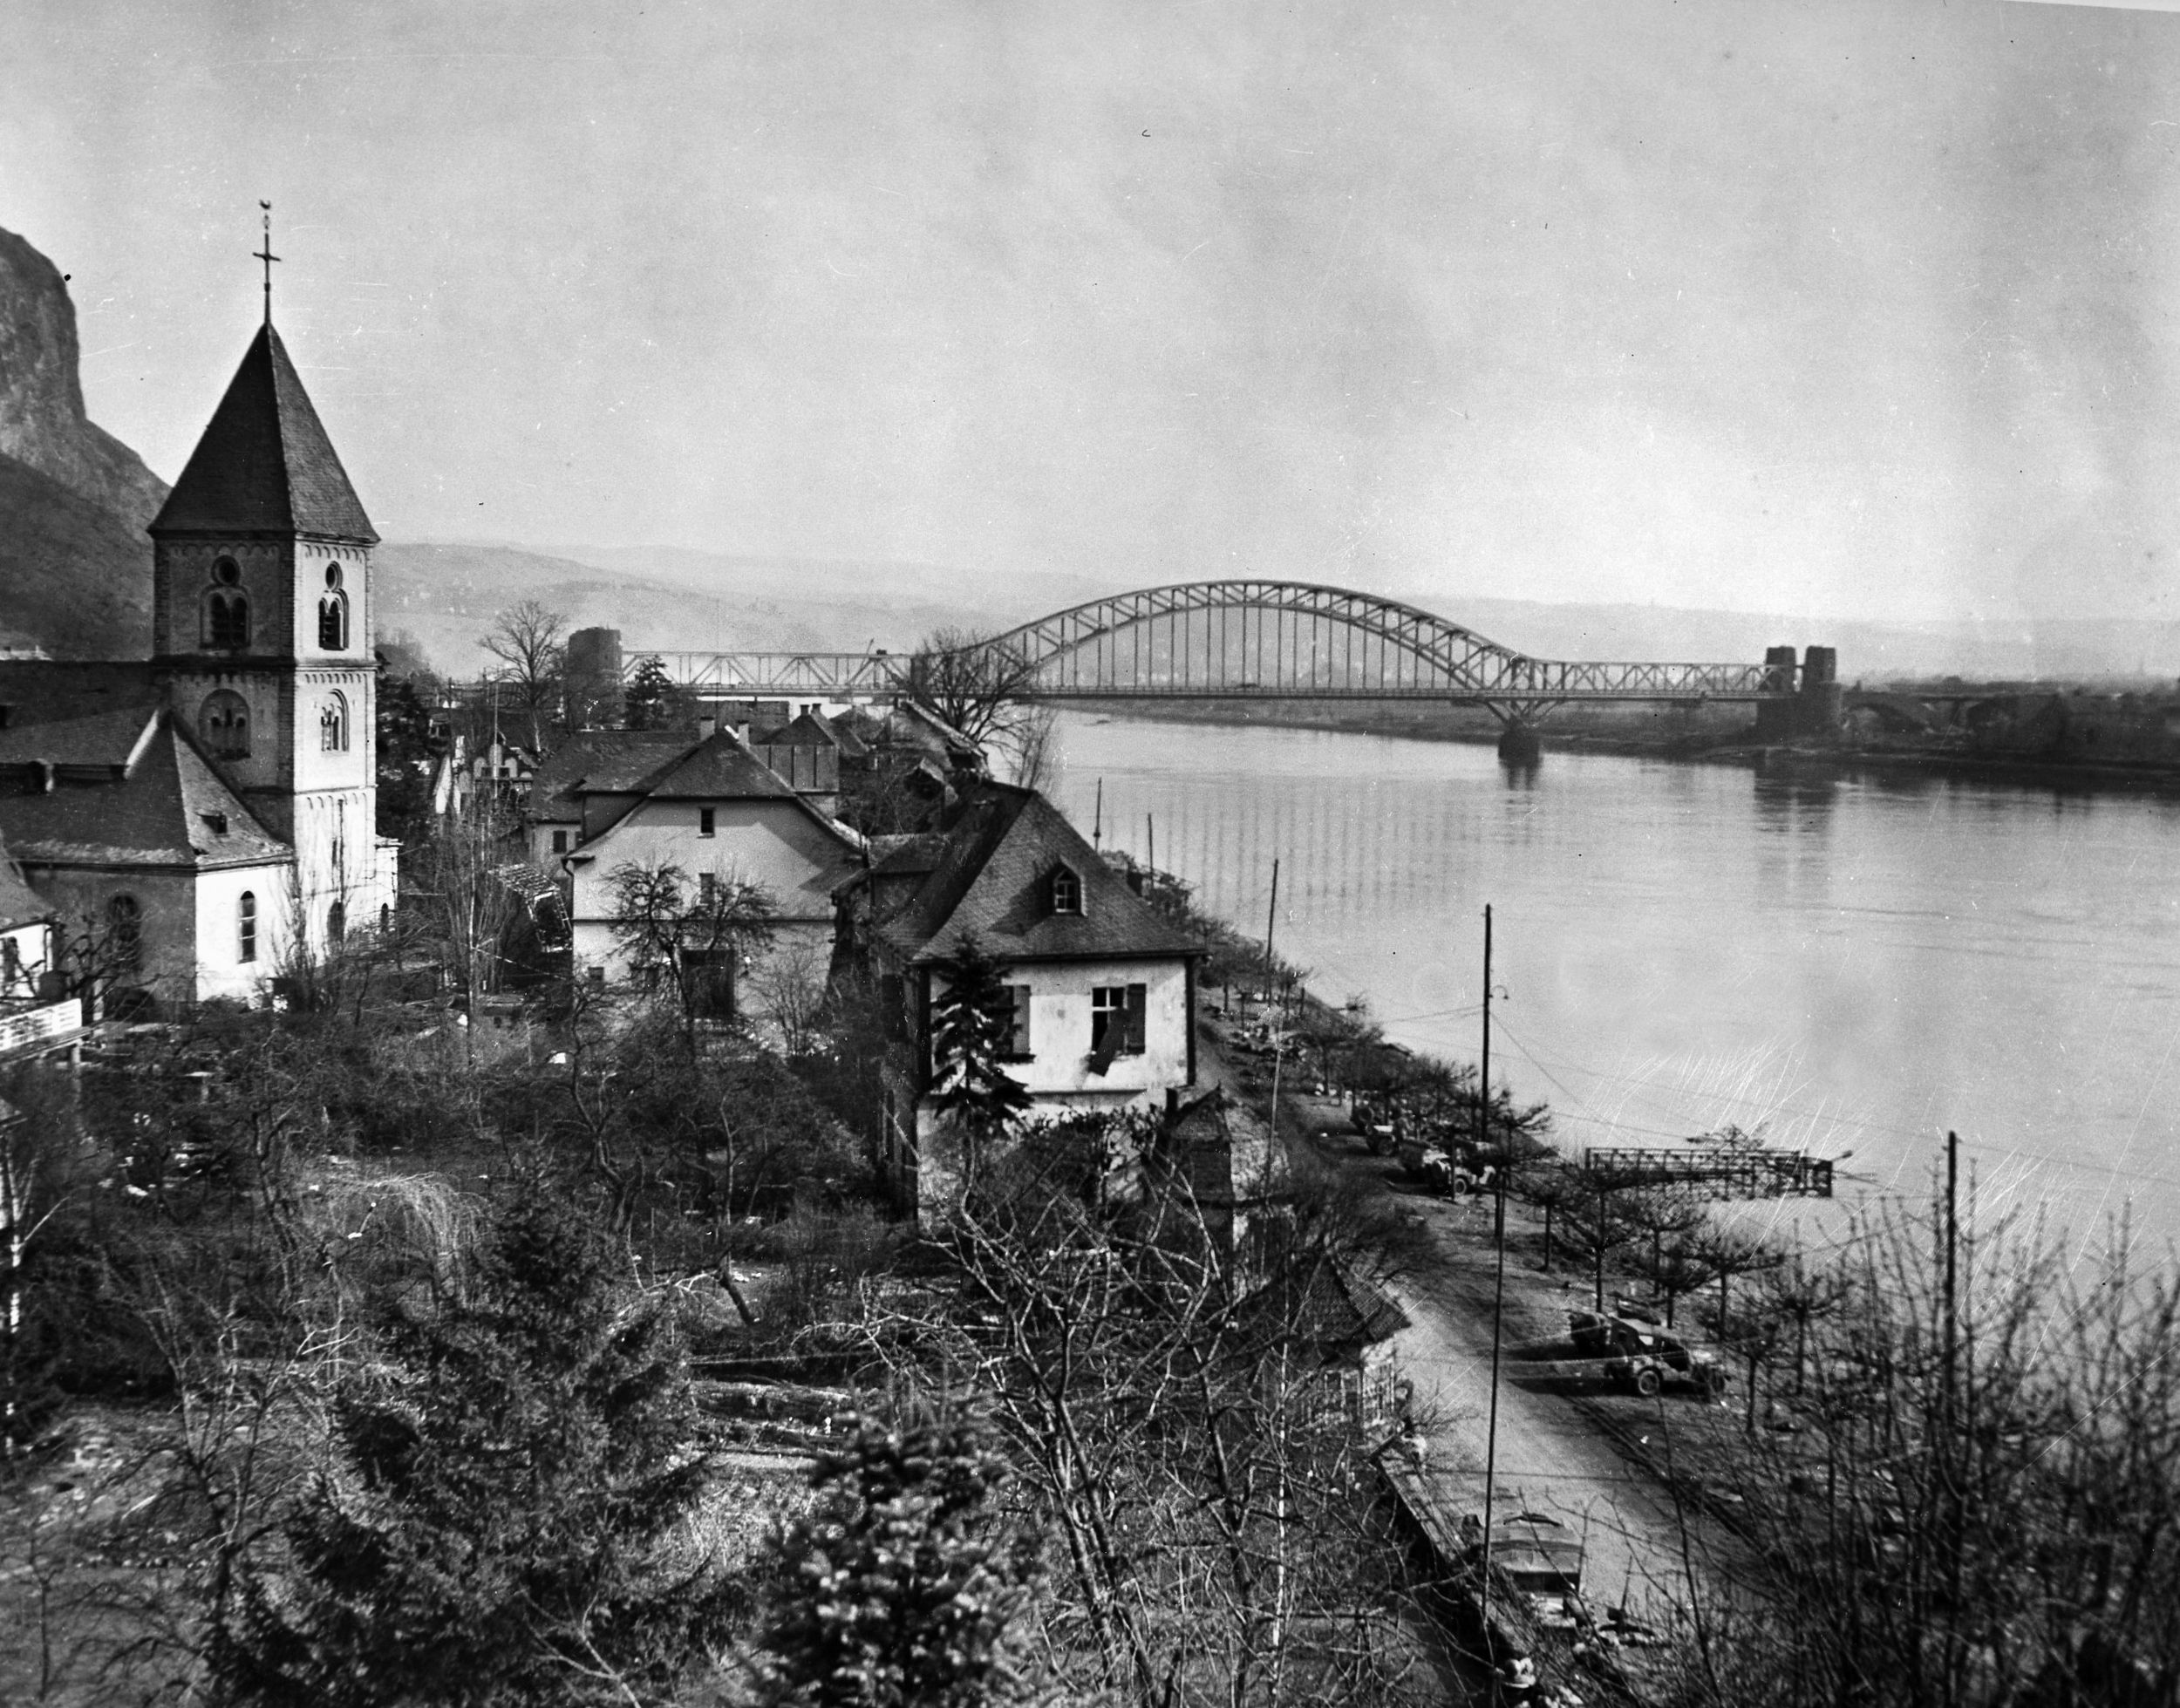 The Ludendorff Bridge at Remagen, Germany, before the intense fighting began for the last remaining bridge over the Rhine River.